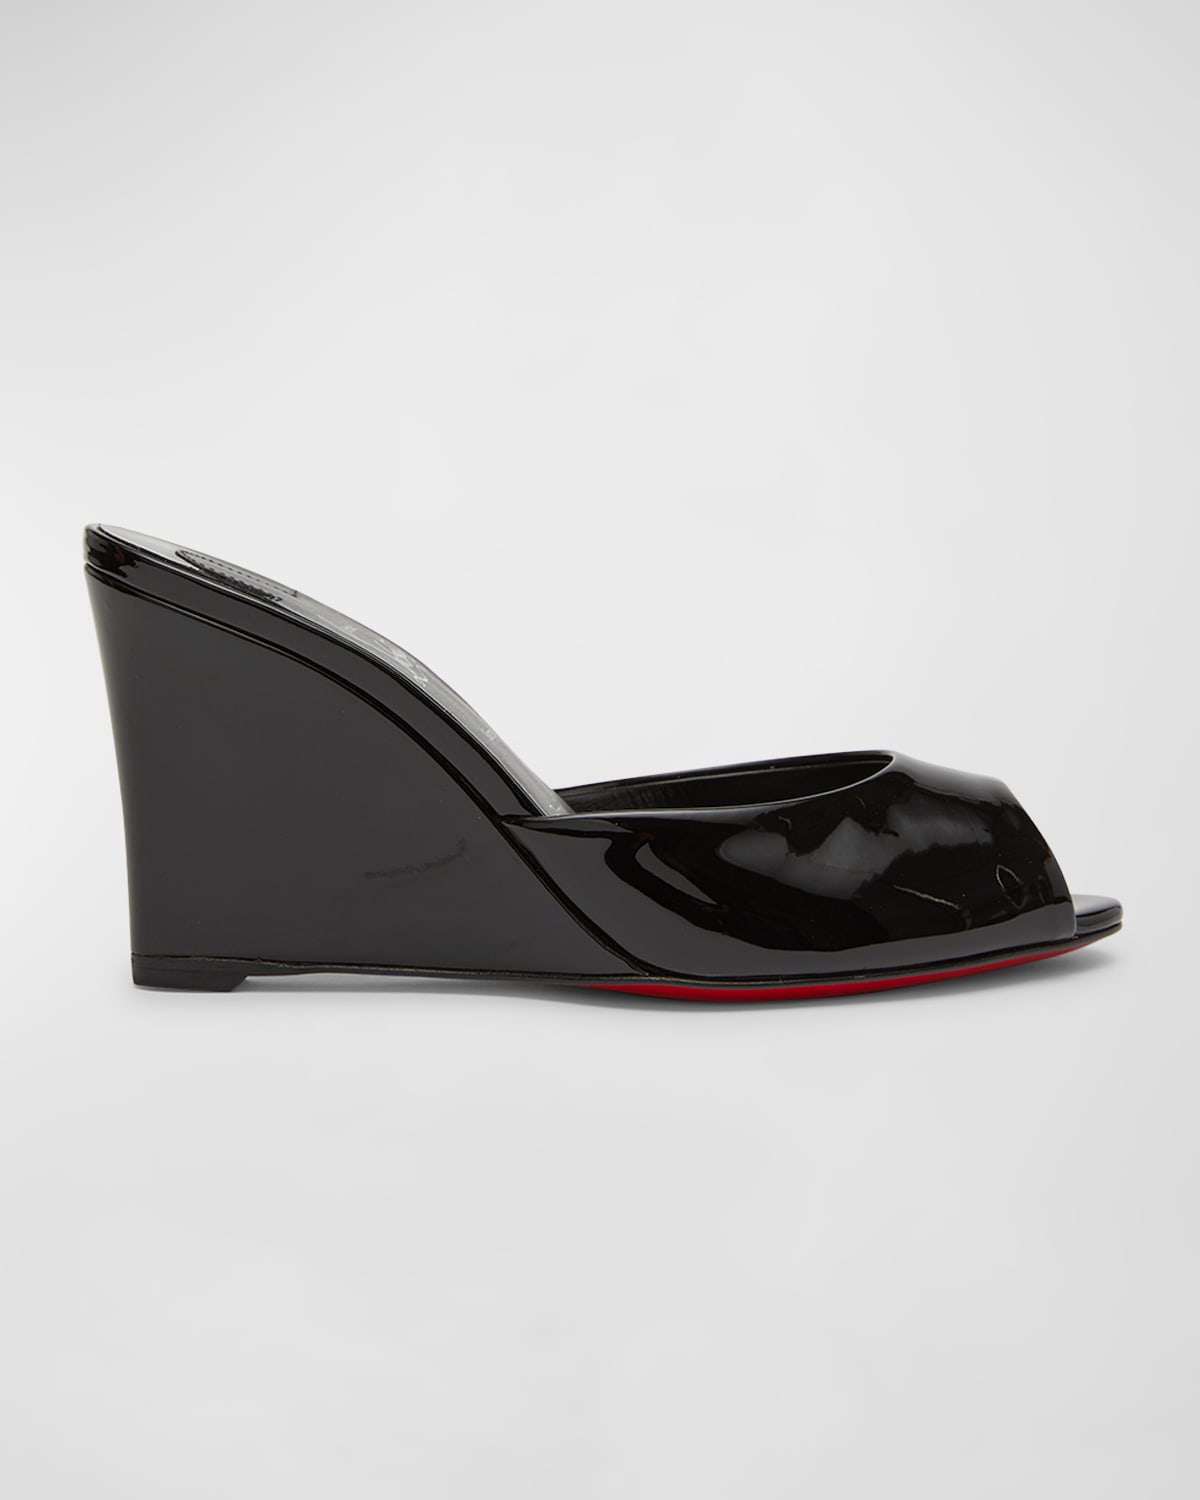 CHRISTIAN LOUBOUTIN ME DOLLY PATENT RED SOLE WEDGE SANDALS